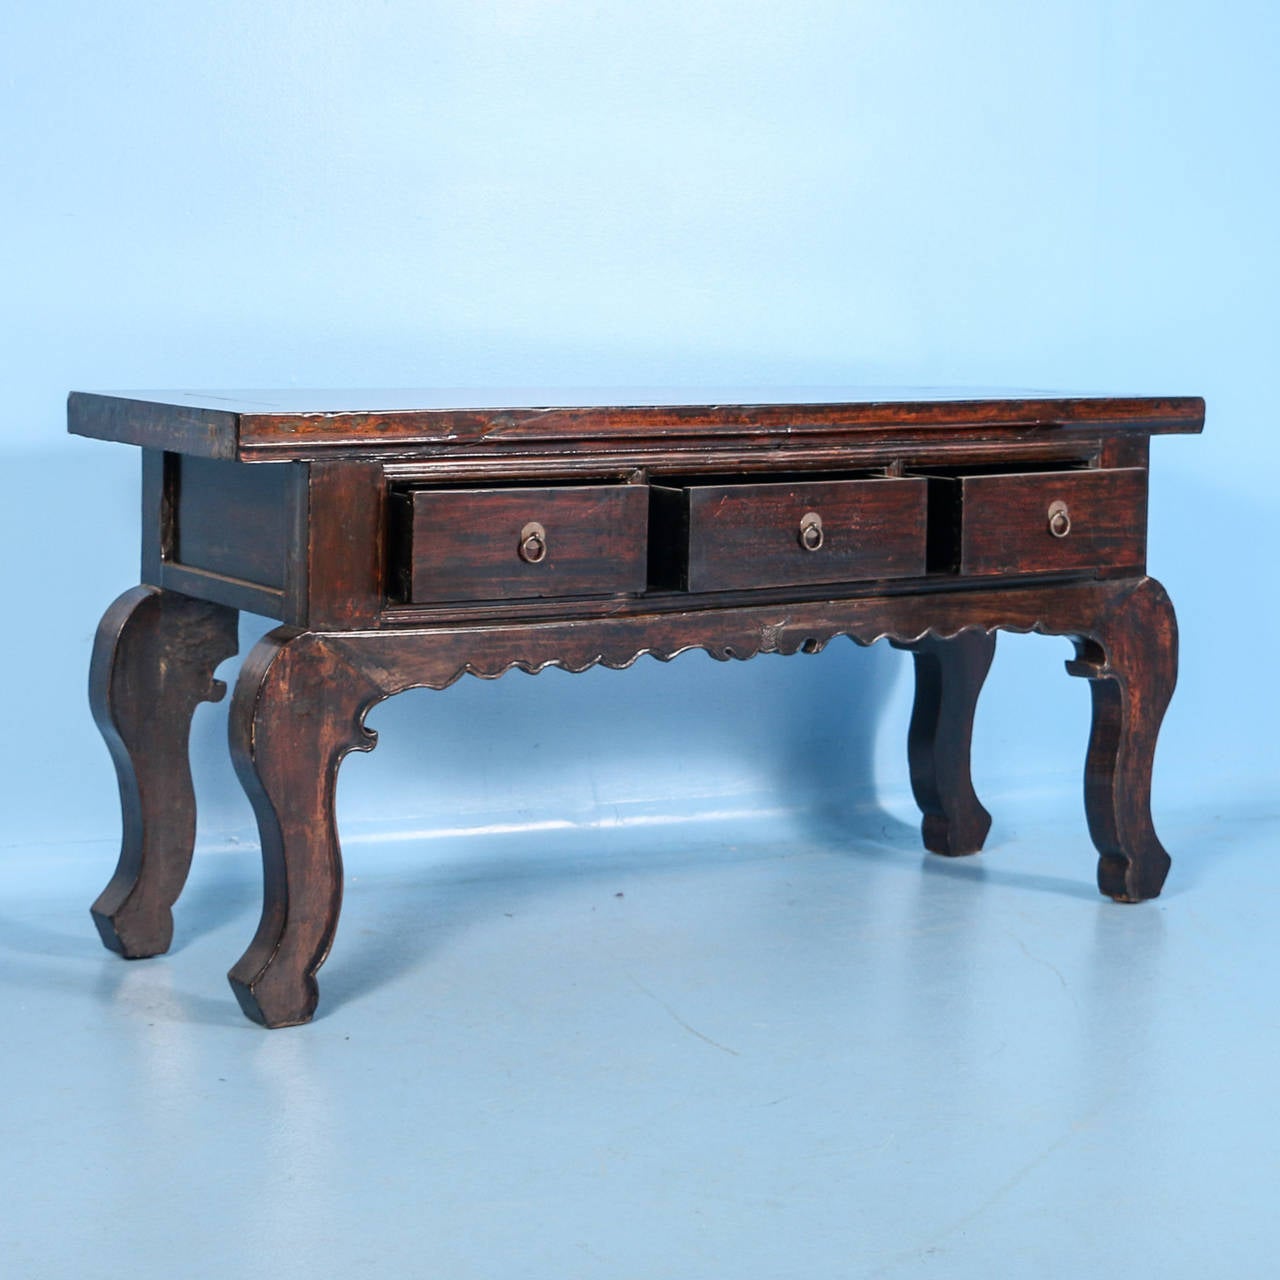 Chinese Antique Console Table from Jiangsu Province, China, 1780